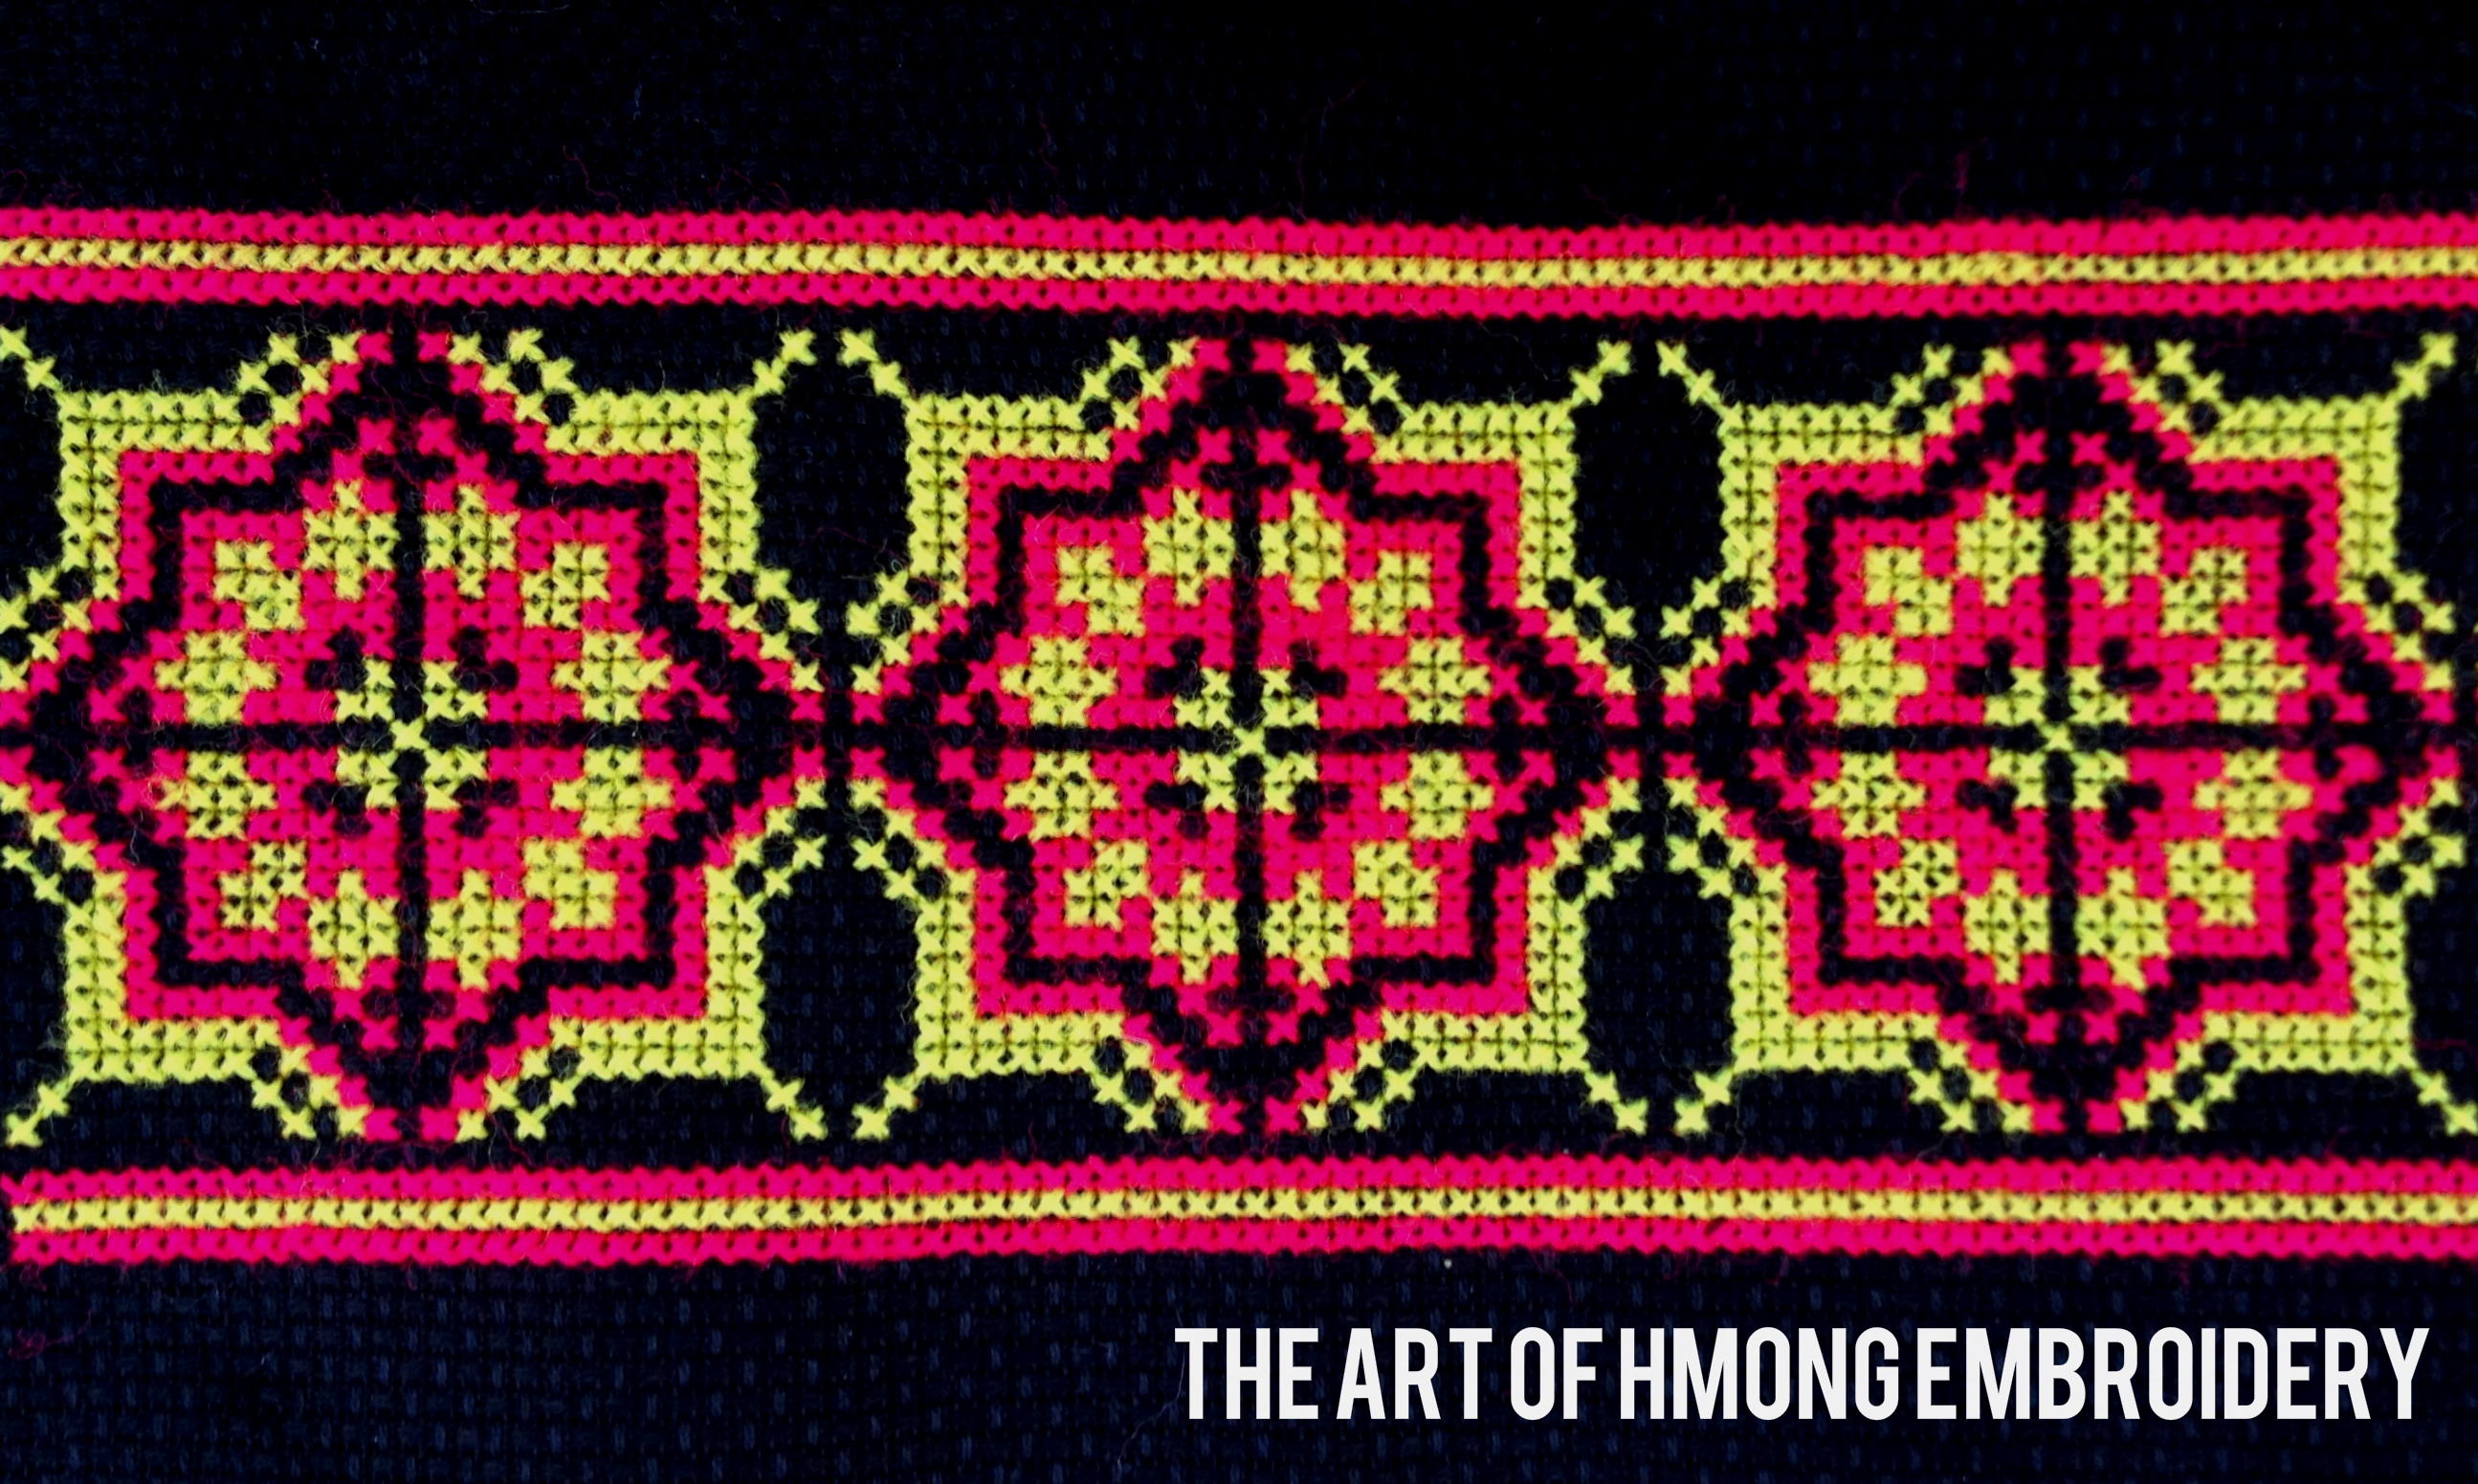 Hmong Embroidery Patterns Hmong Cross Stitching The Art Of Hmong Embroidery